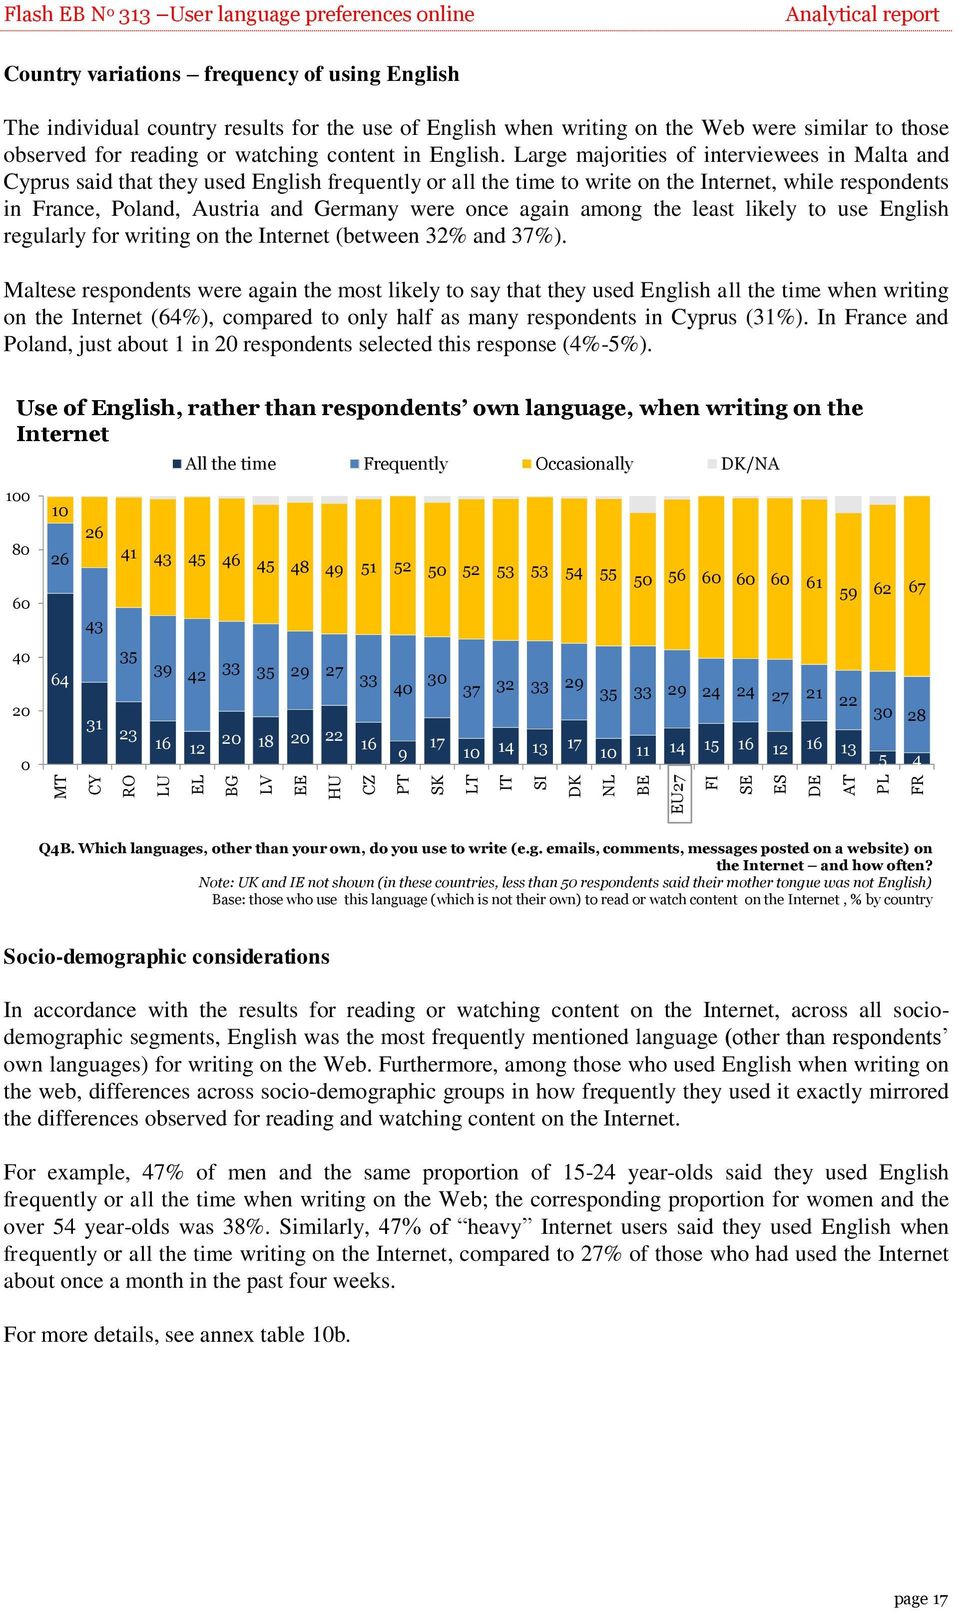 Large majorities of interviewees in Malta and Cyprus said that they used English frequently or all the time to write on the Internet, while respondents in France, Poland, Austria and Germany were